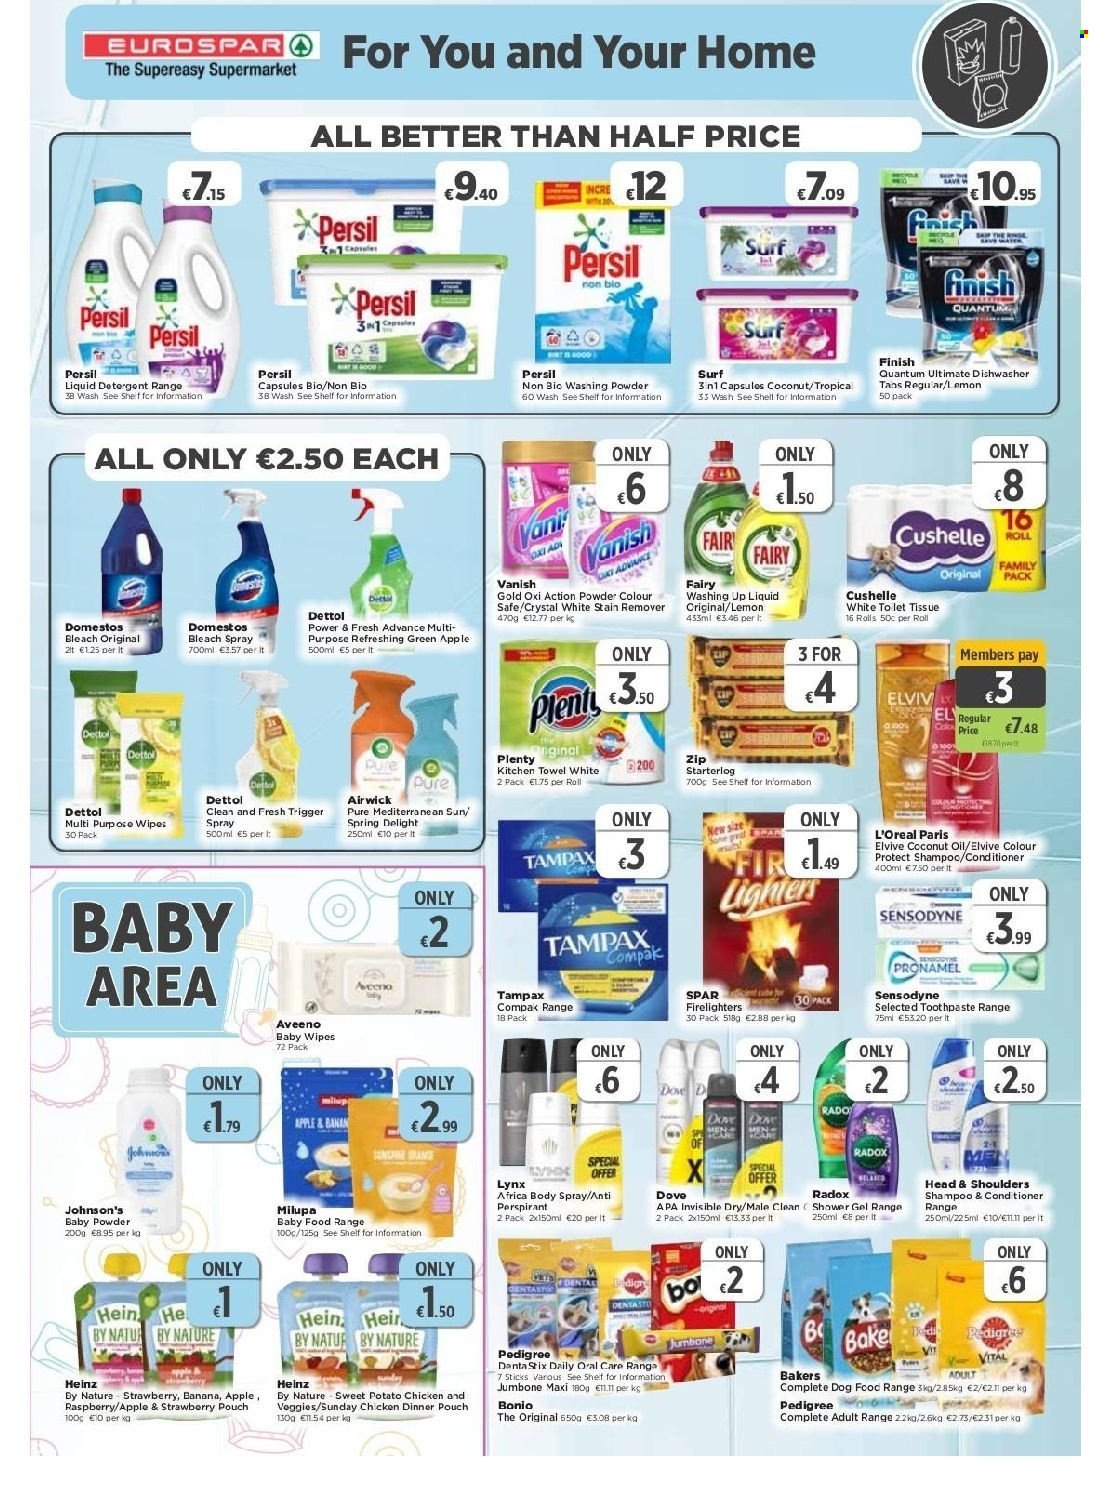 EUROSPAR offer  - 21.10.2021 - 10.11.2021 - Sales products - coconut, Heinz, oil, wipes, baby wipes, Johnson's, Aveeno, Dettol, baby powder, Dove, tissues, Plenty, kitchen towels, Cushelle, Domestos, bleach, stain remover, Fairy, Vanish, Persil, Surf, shower gel, Radox, toothpaste, Sensodyne, Tampax, L’Oréal, conditioner, Head & Shoulders, body spray, BIC, firelighters, Air Wick, Bakers. Page 7.